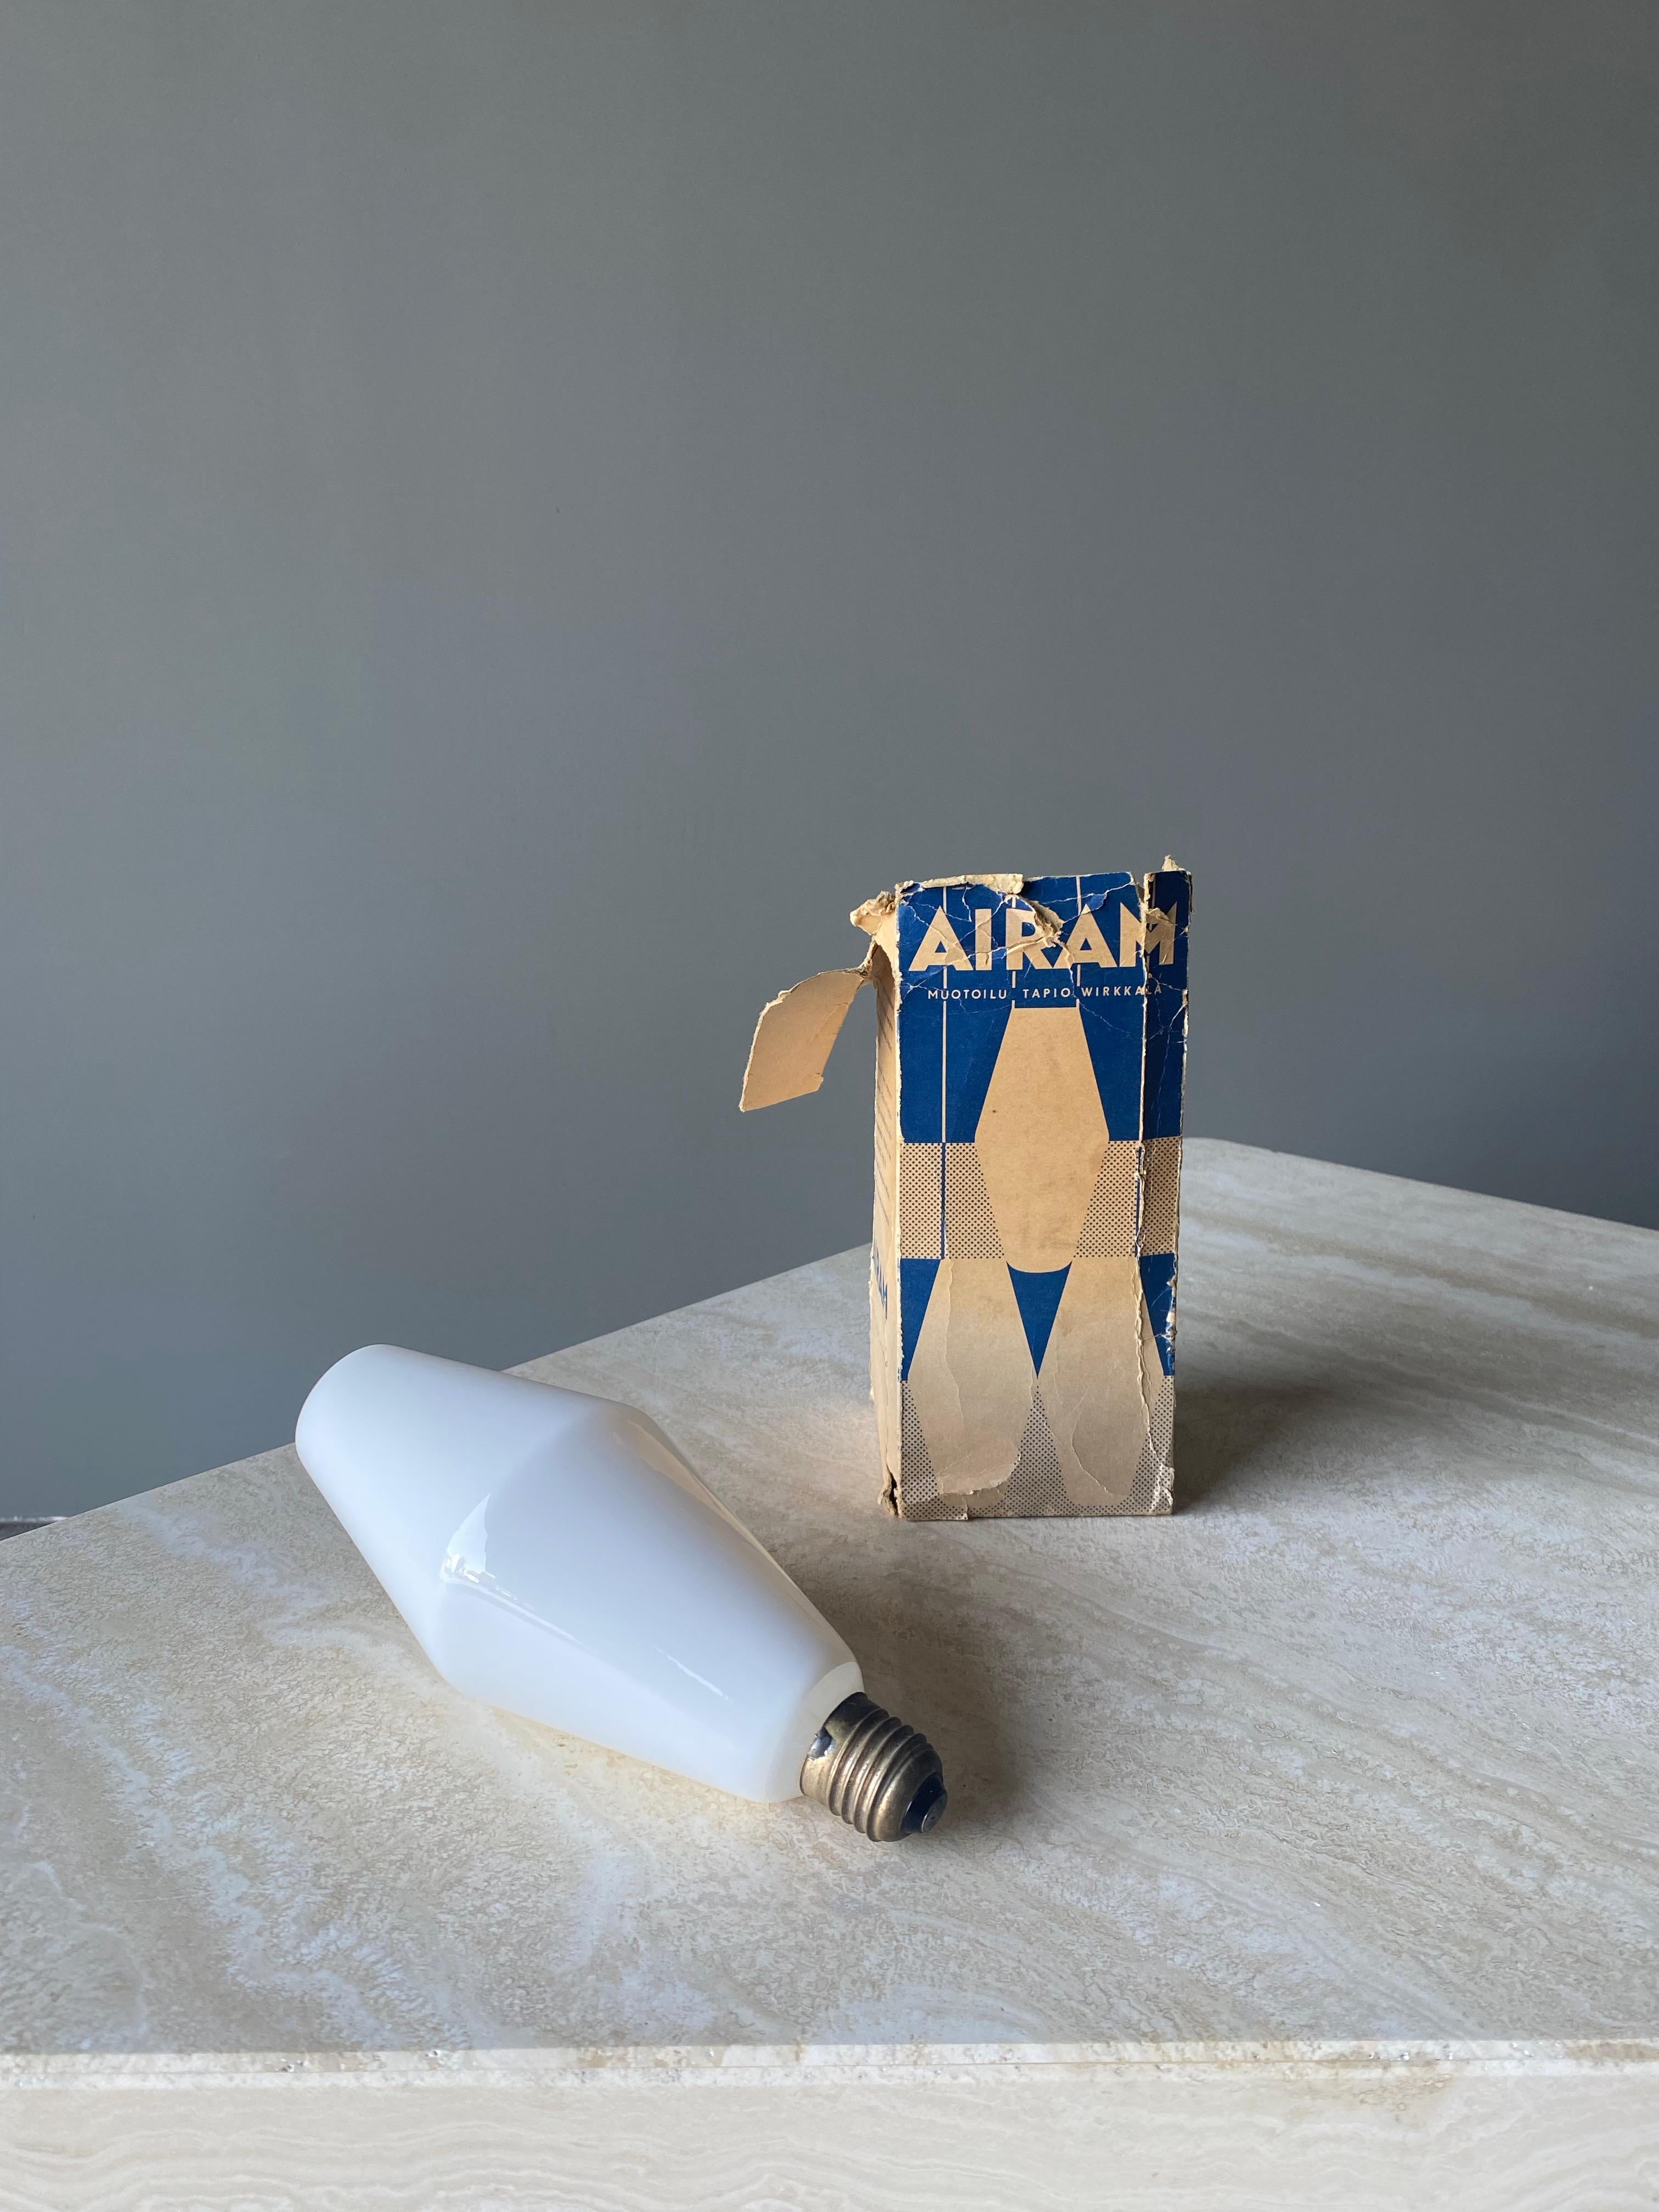 Oy Airam Ab, LIghtbulb By Tapio Wirkkala, 1960. Comes in original box, box shows wear and loss of material. lightbulb is in mint working condition. 
Dimensions of the lightbulb are 3 1/8'' wide by 8 '' tall.